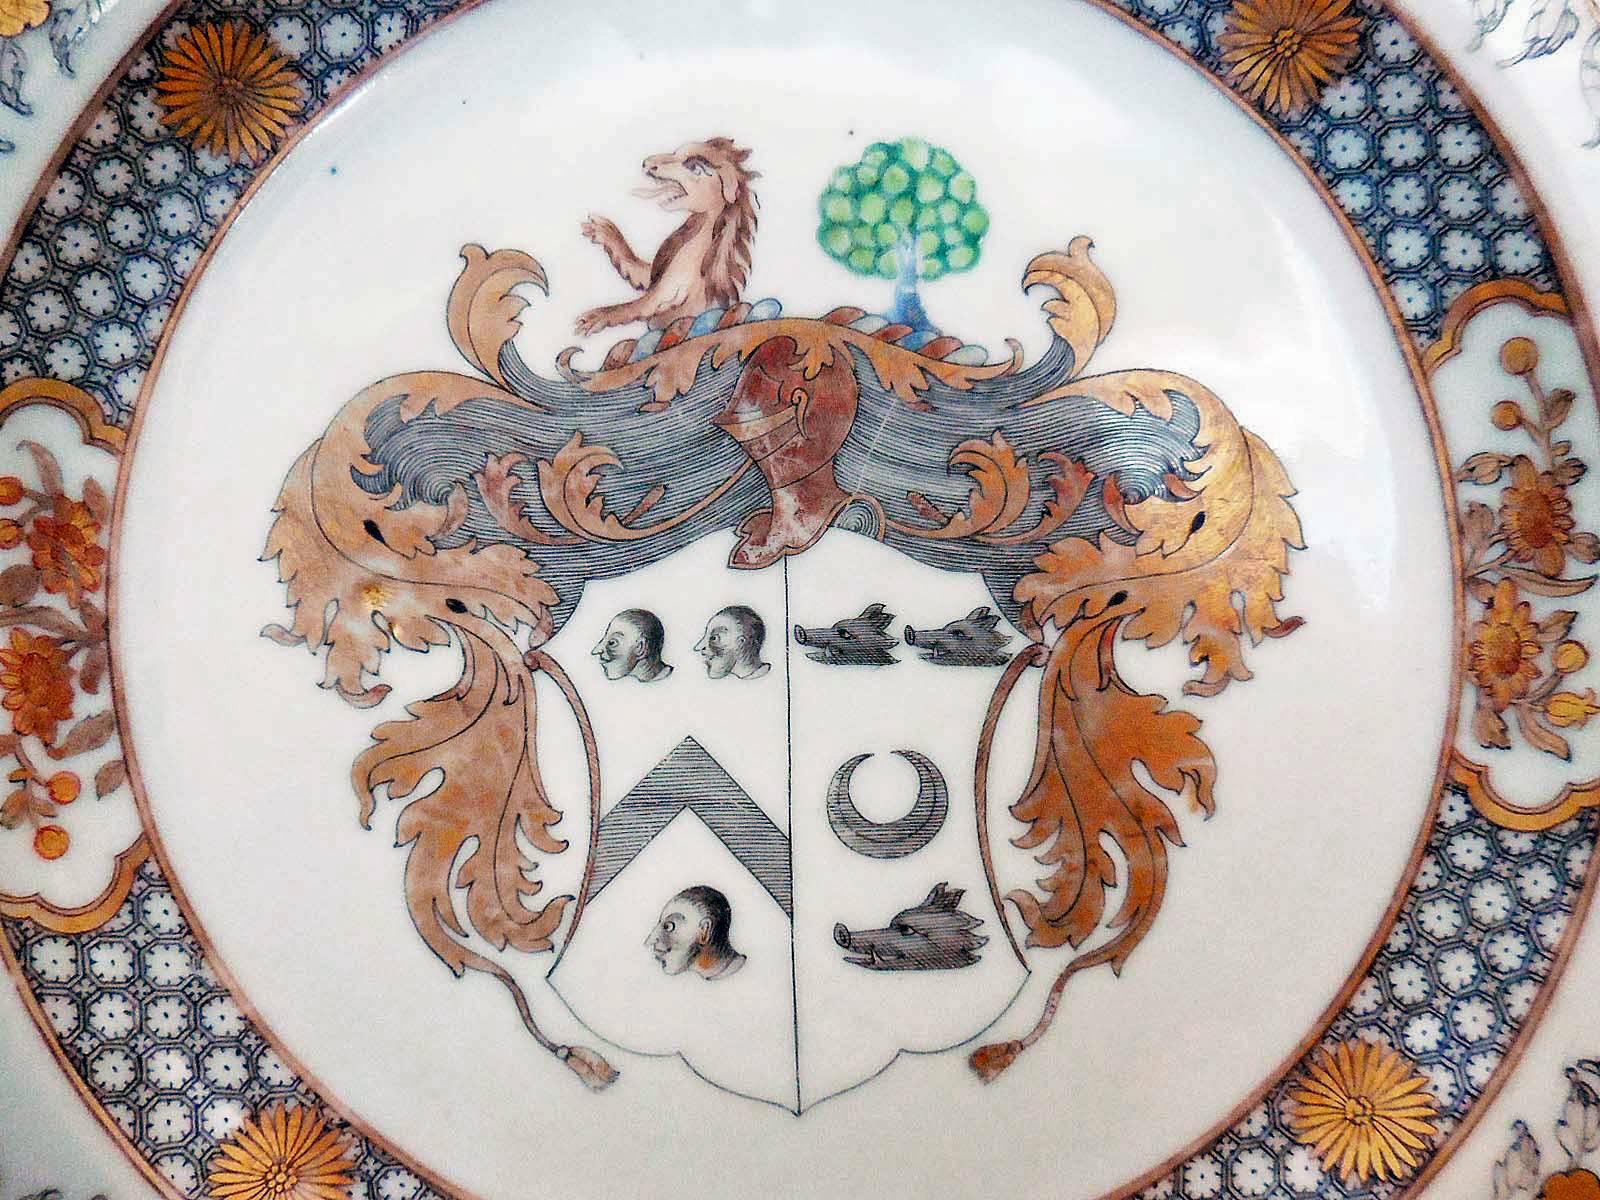 The Chinese Export porcelain armorial plates are from the Yung Cheng period, circa 1735.

The coat of arms of of Moore impaling Hog being painted en grisaille, 